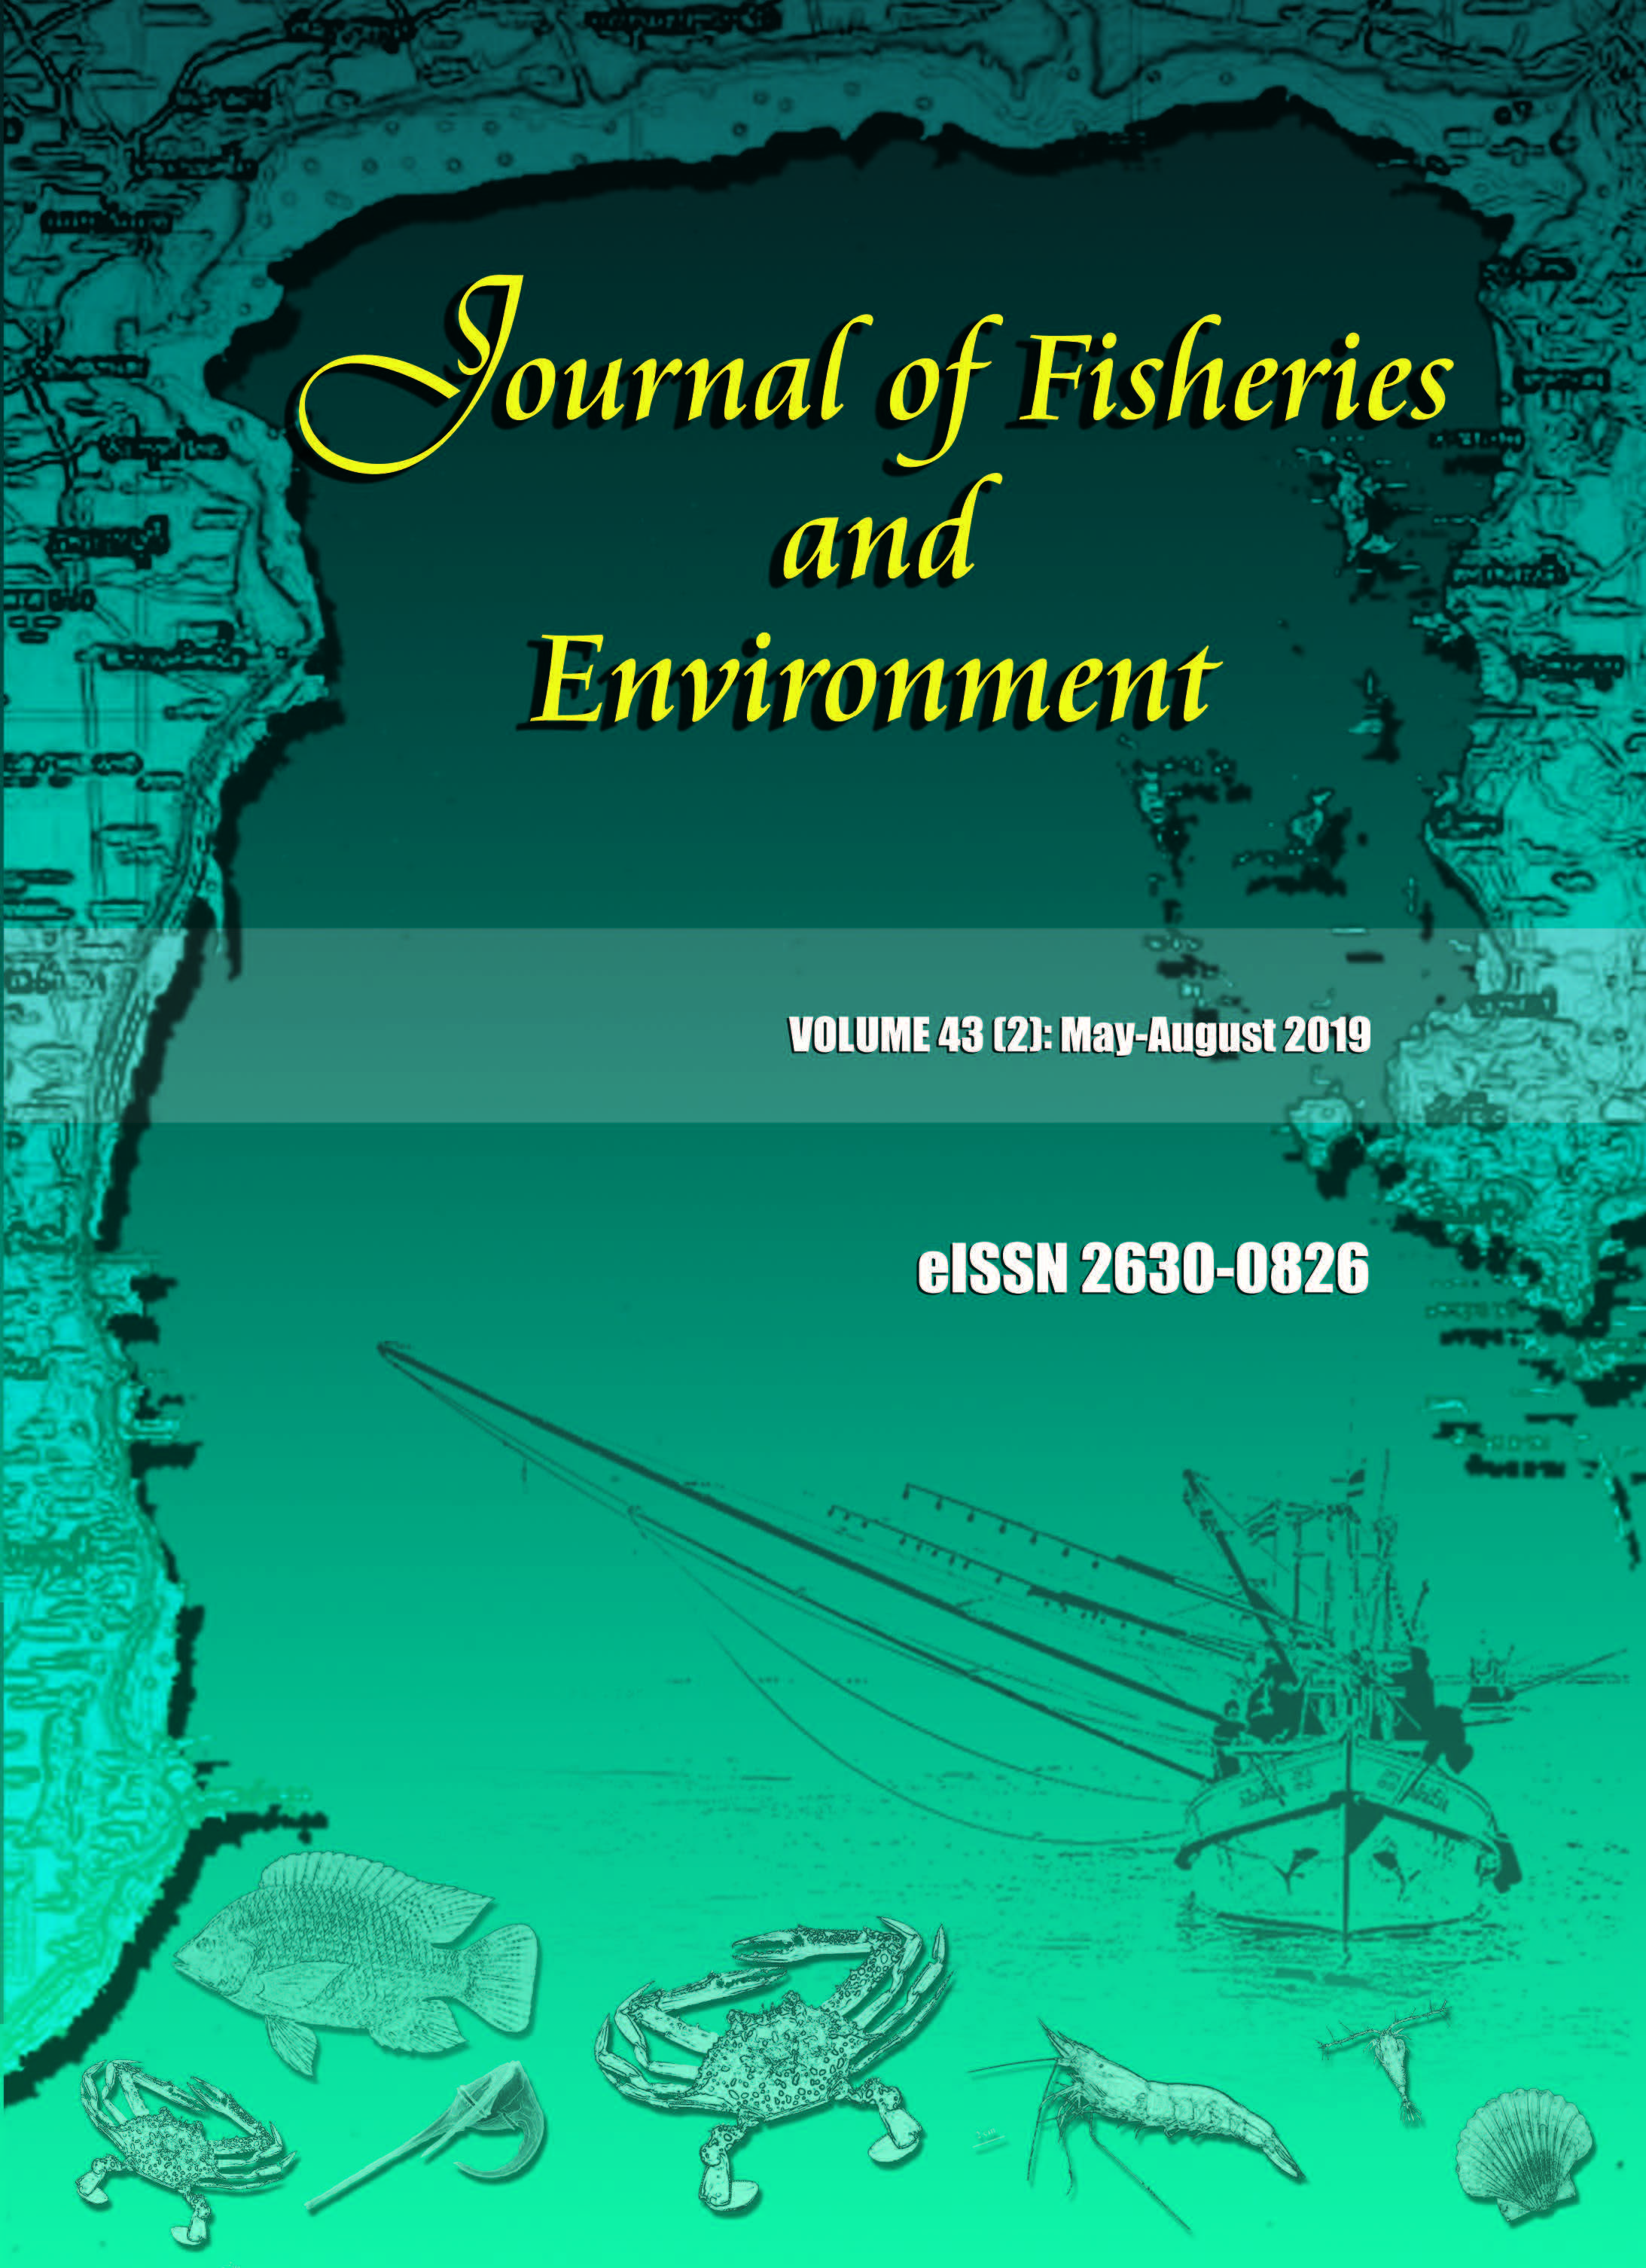 Assessment of Tilapia Cage Farming Practices in Relation to the